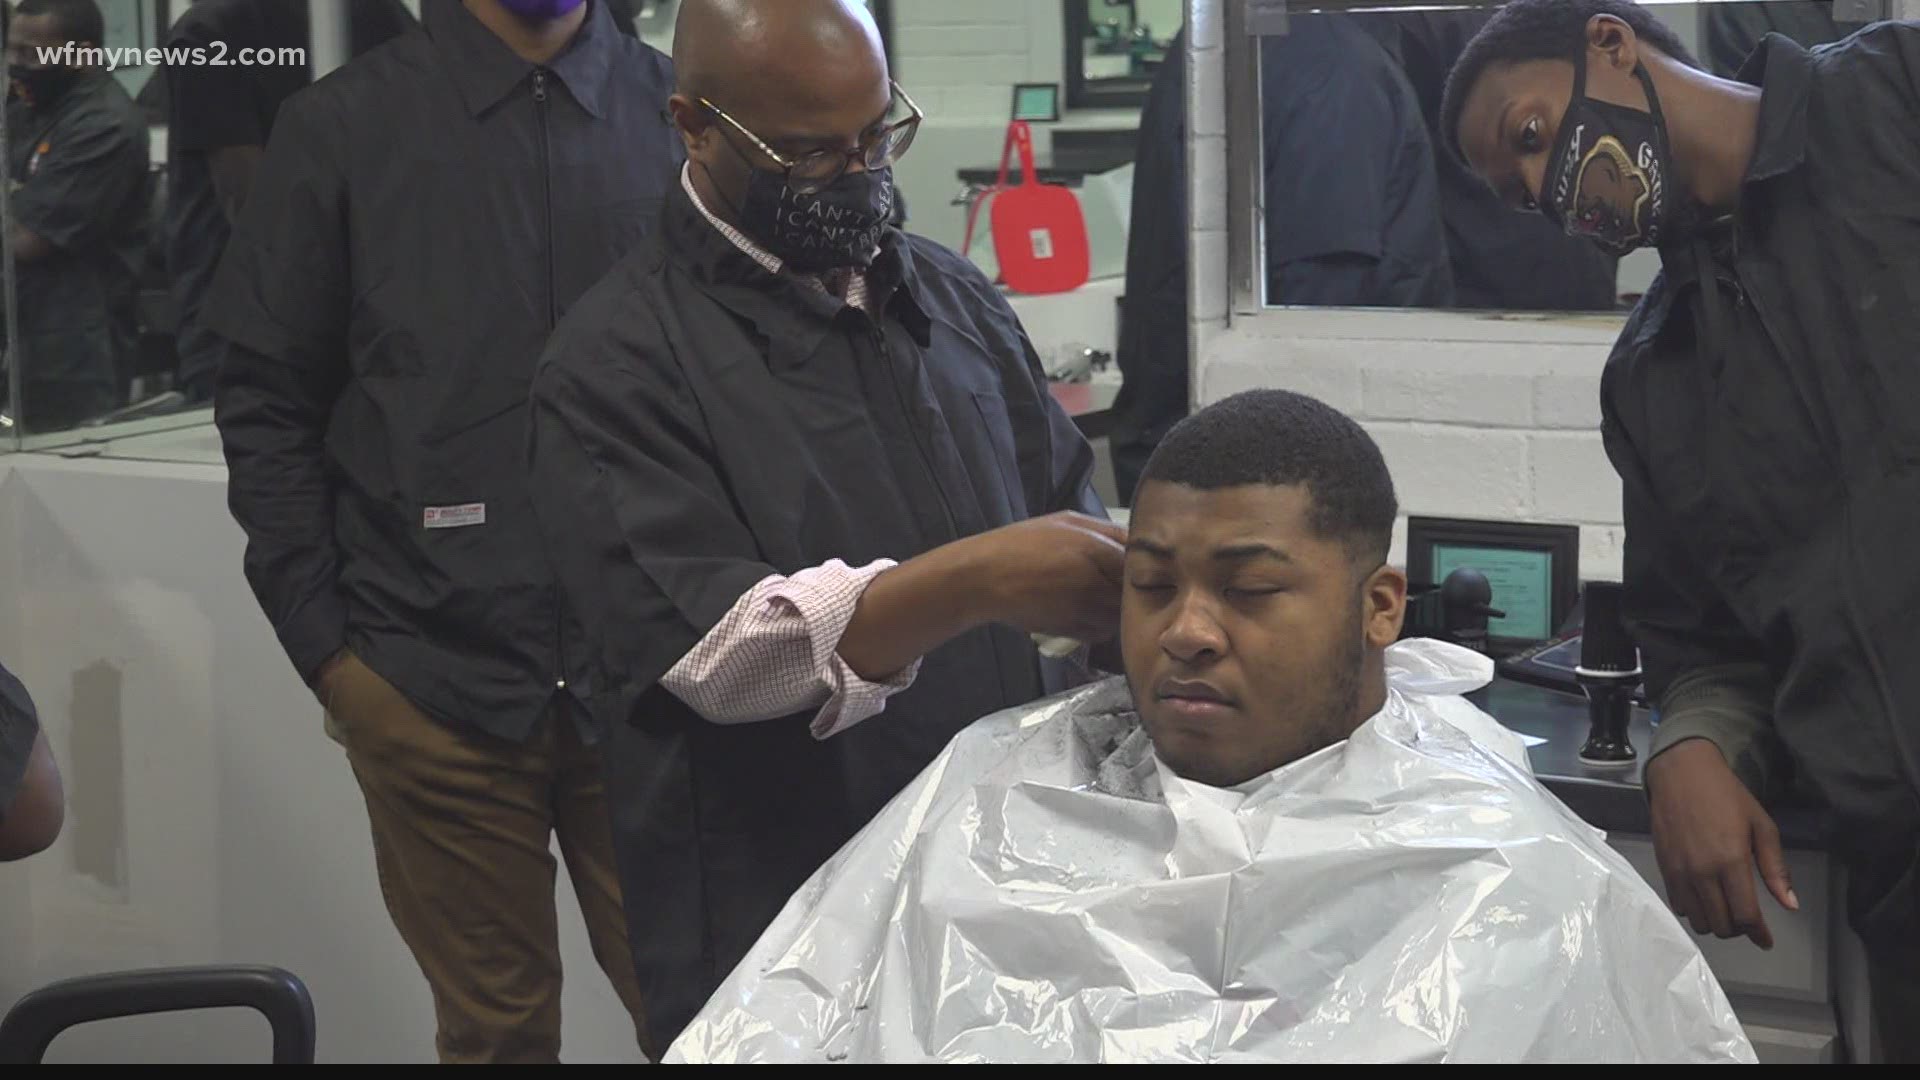 Dr. Gene Blackmon and his staff are doing everything they can to positively impact the community, one cut at a time.